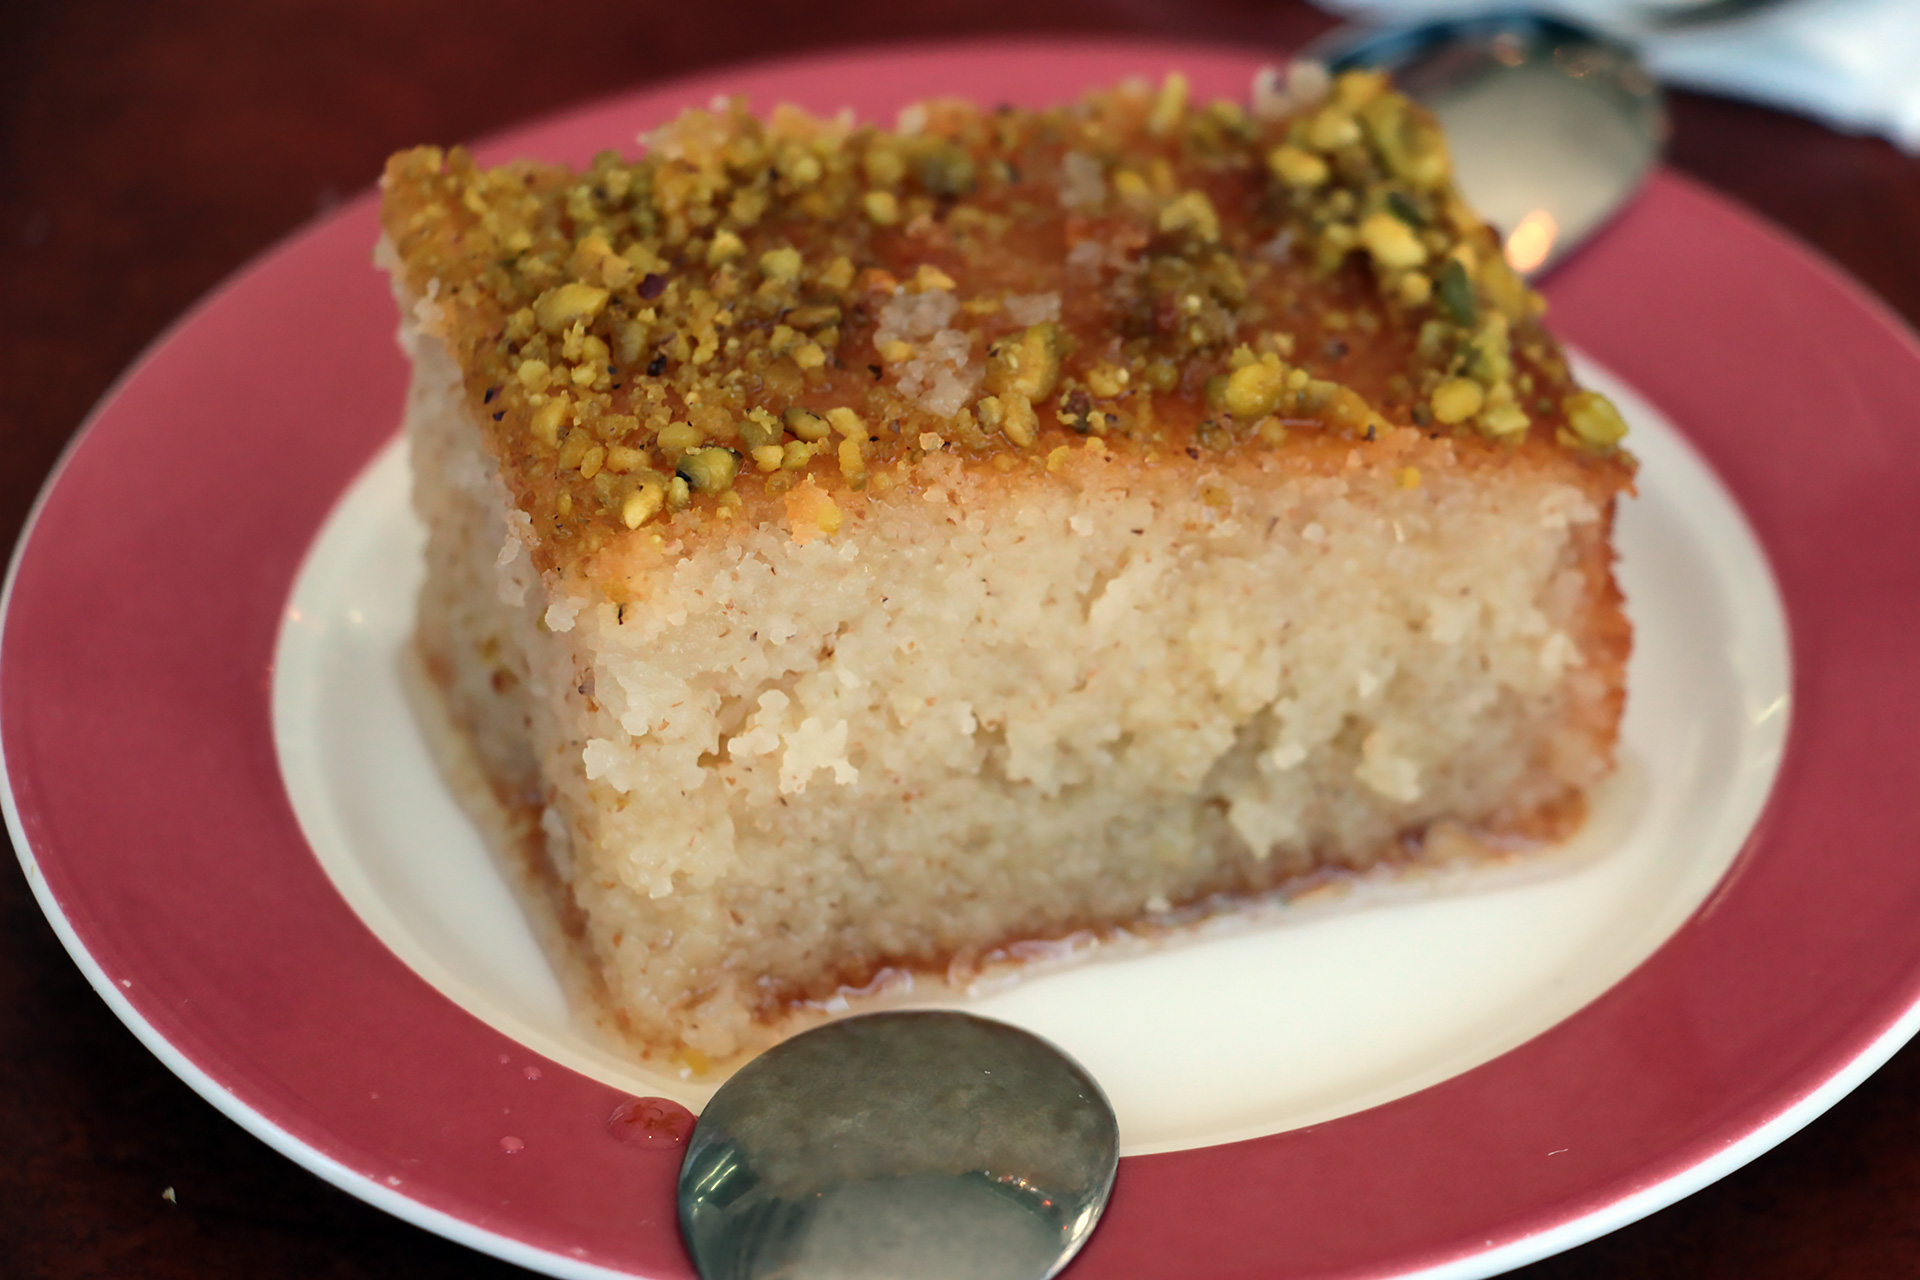 The dessert is called <em>basboussa</em>, an orange blossom water spiked semolina cake topped with pistachios that ultimately tastes like a floral-tinged baklava with the texture of a syrup-soaked Belgian waffle.